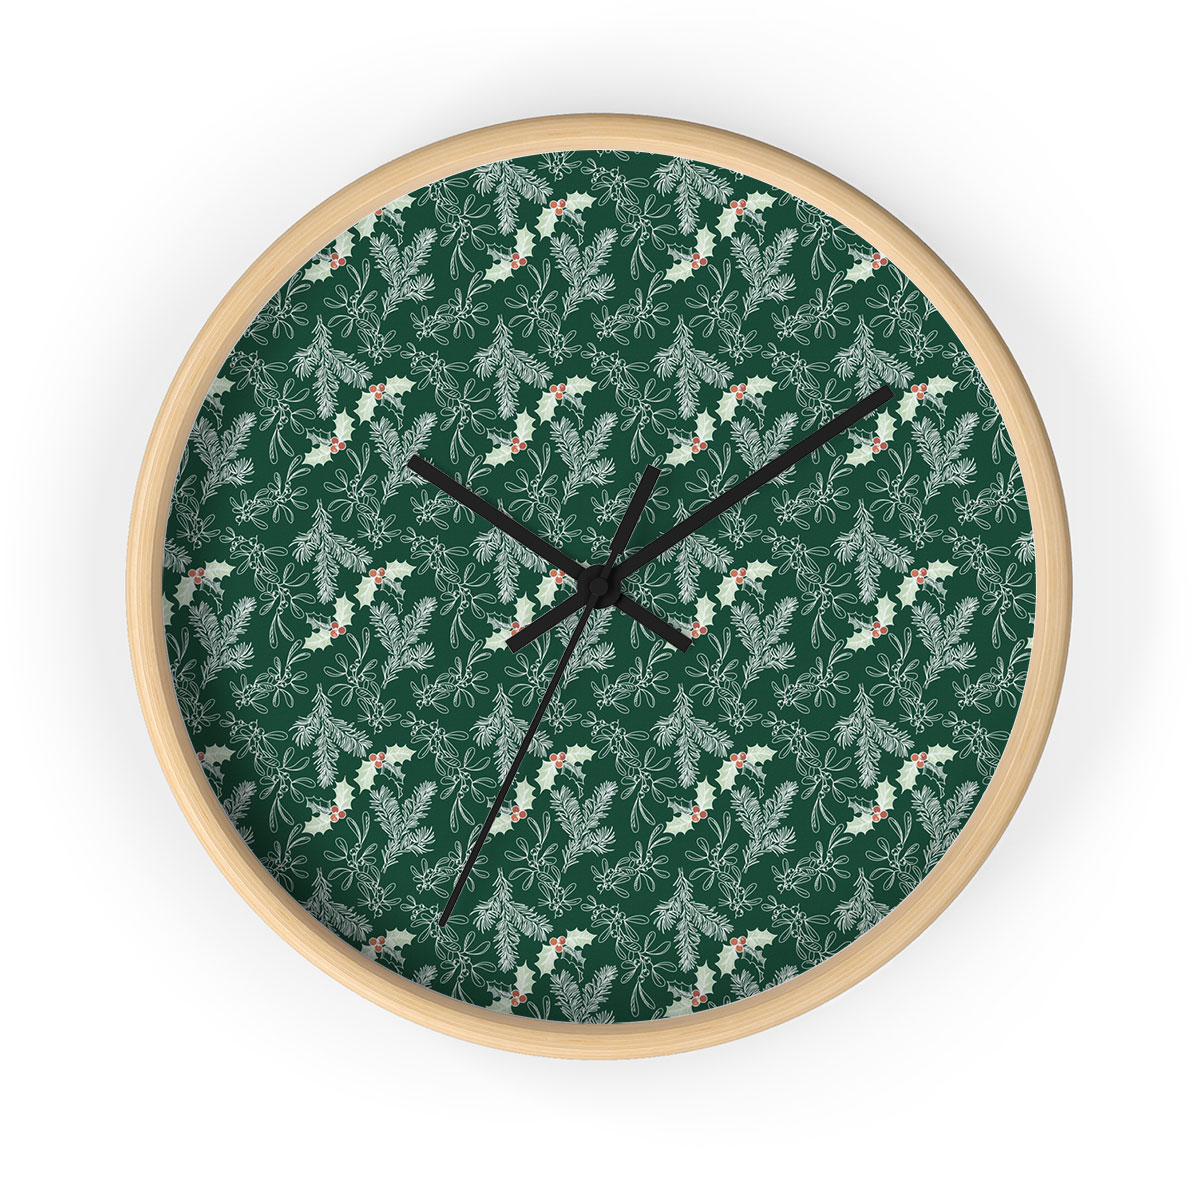 Holly Leaf, Christmas Mistletoe And Pine Tree Branche Printed Wooden Wall Clock